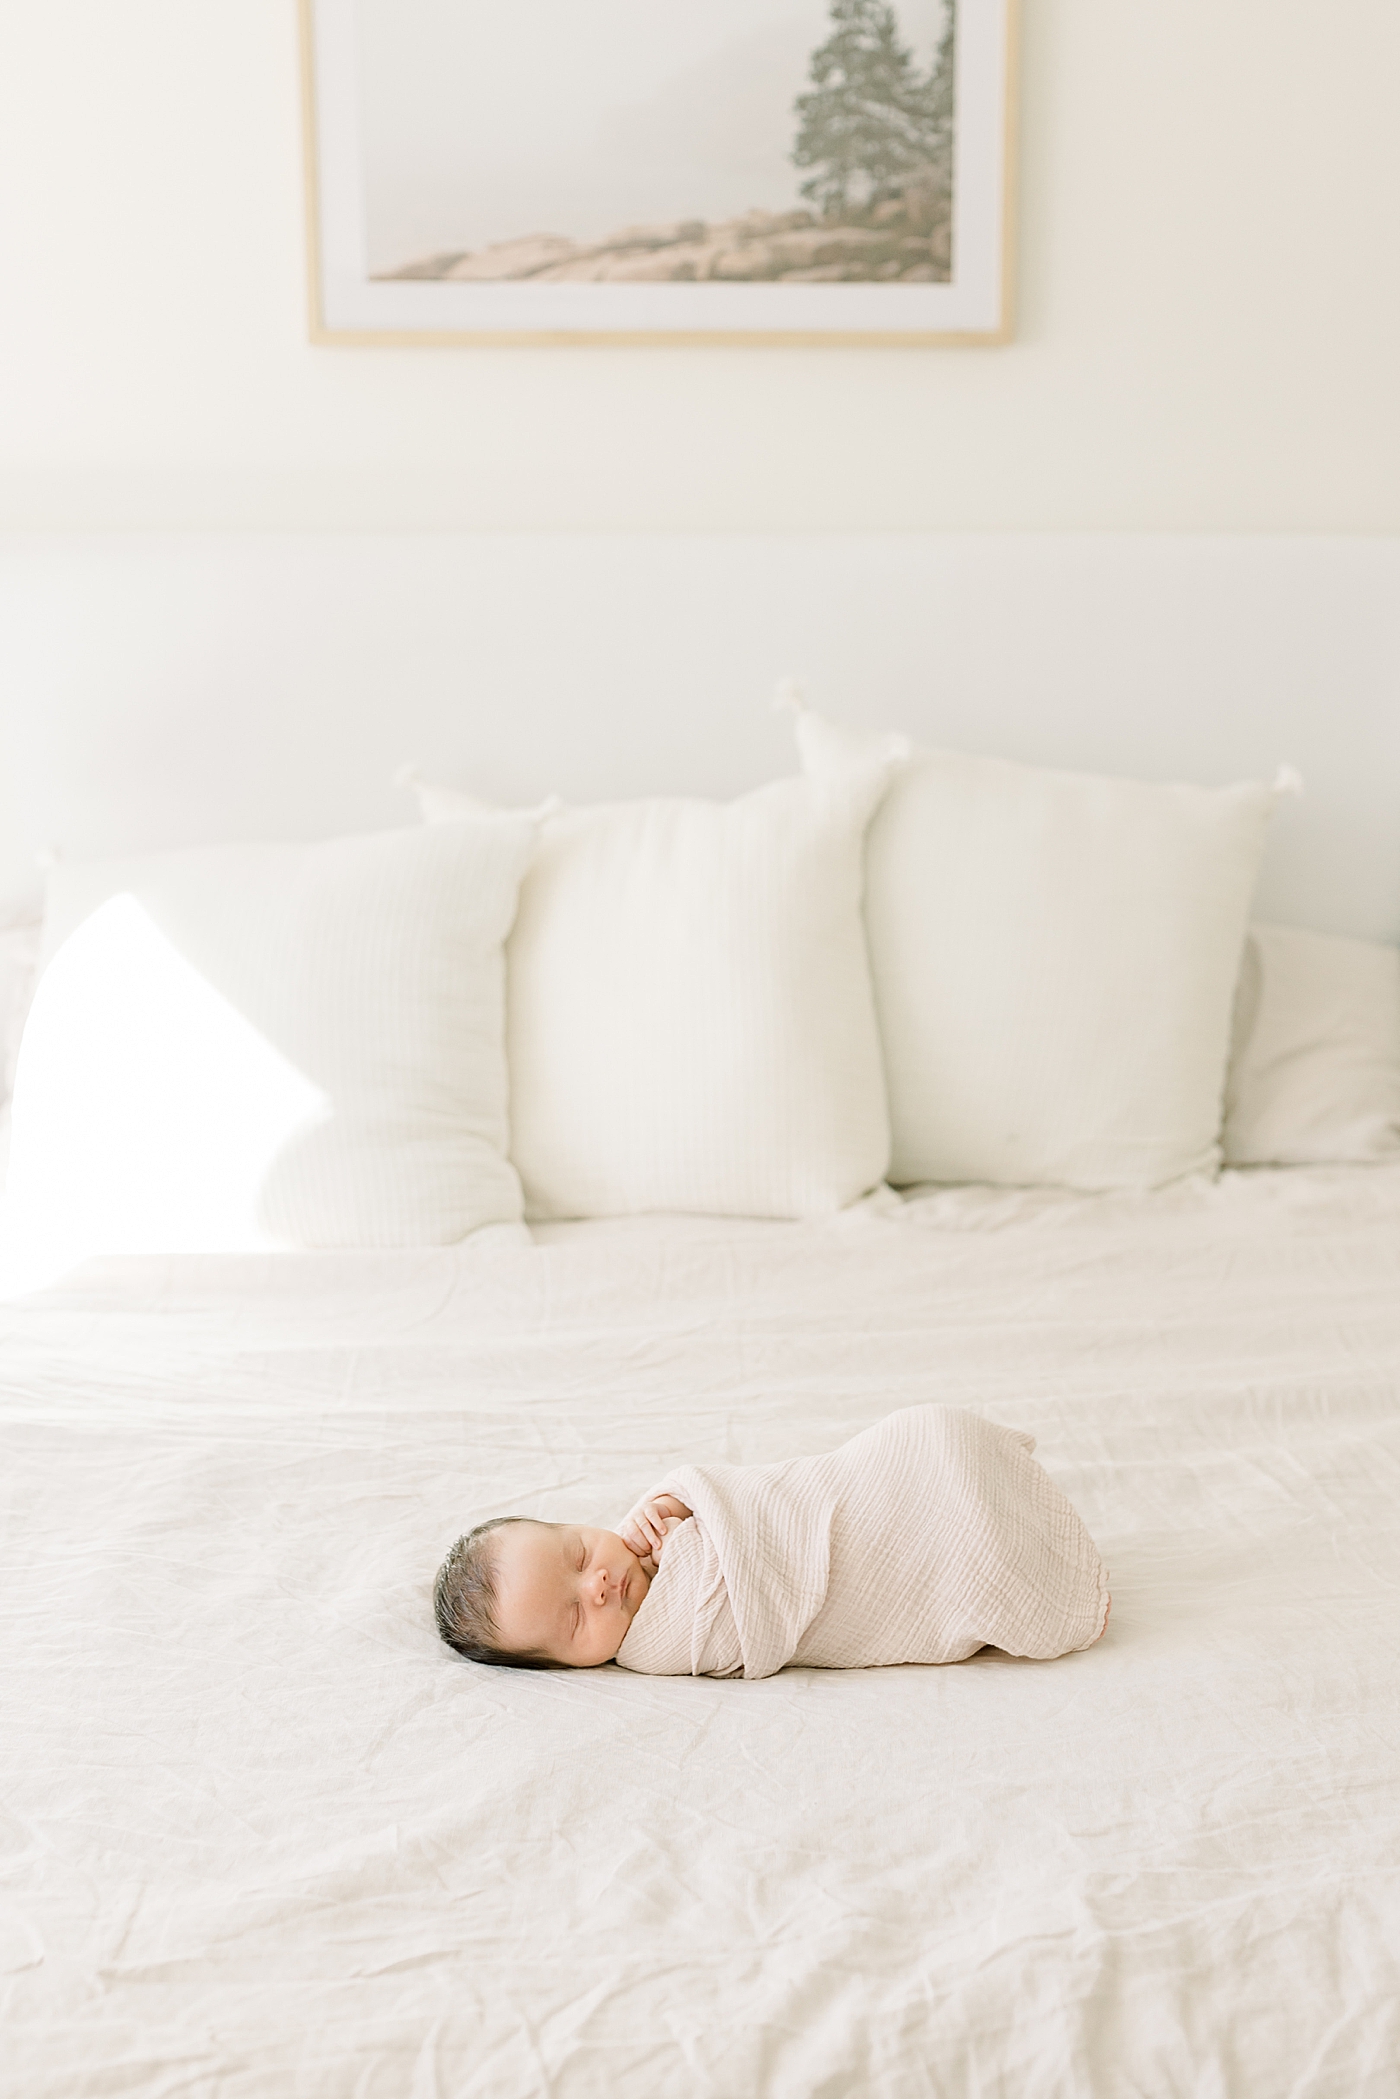 Newborn baby girl wrapped in a cream blanket | Image by Caitlyn Motycka